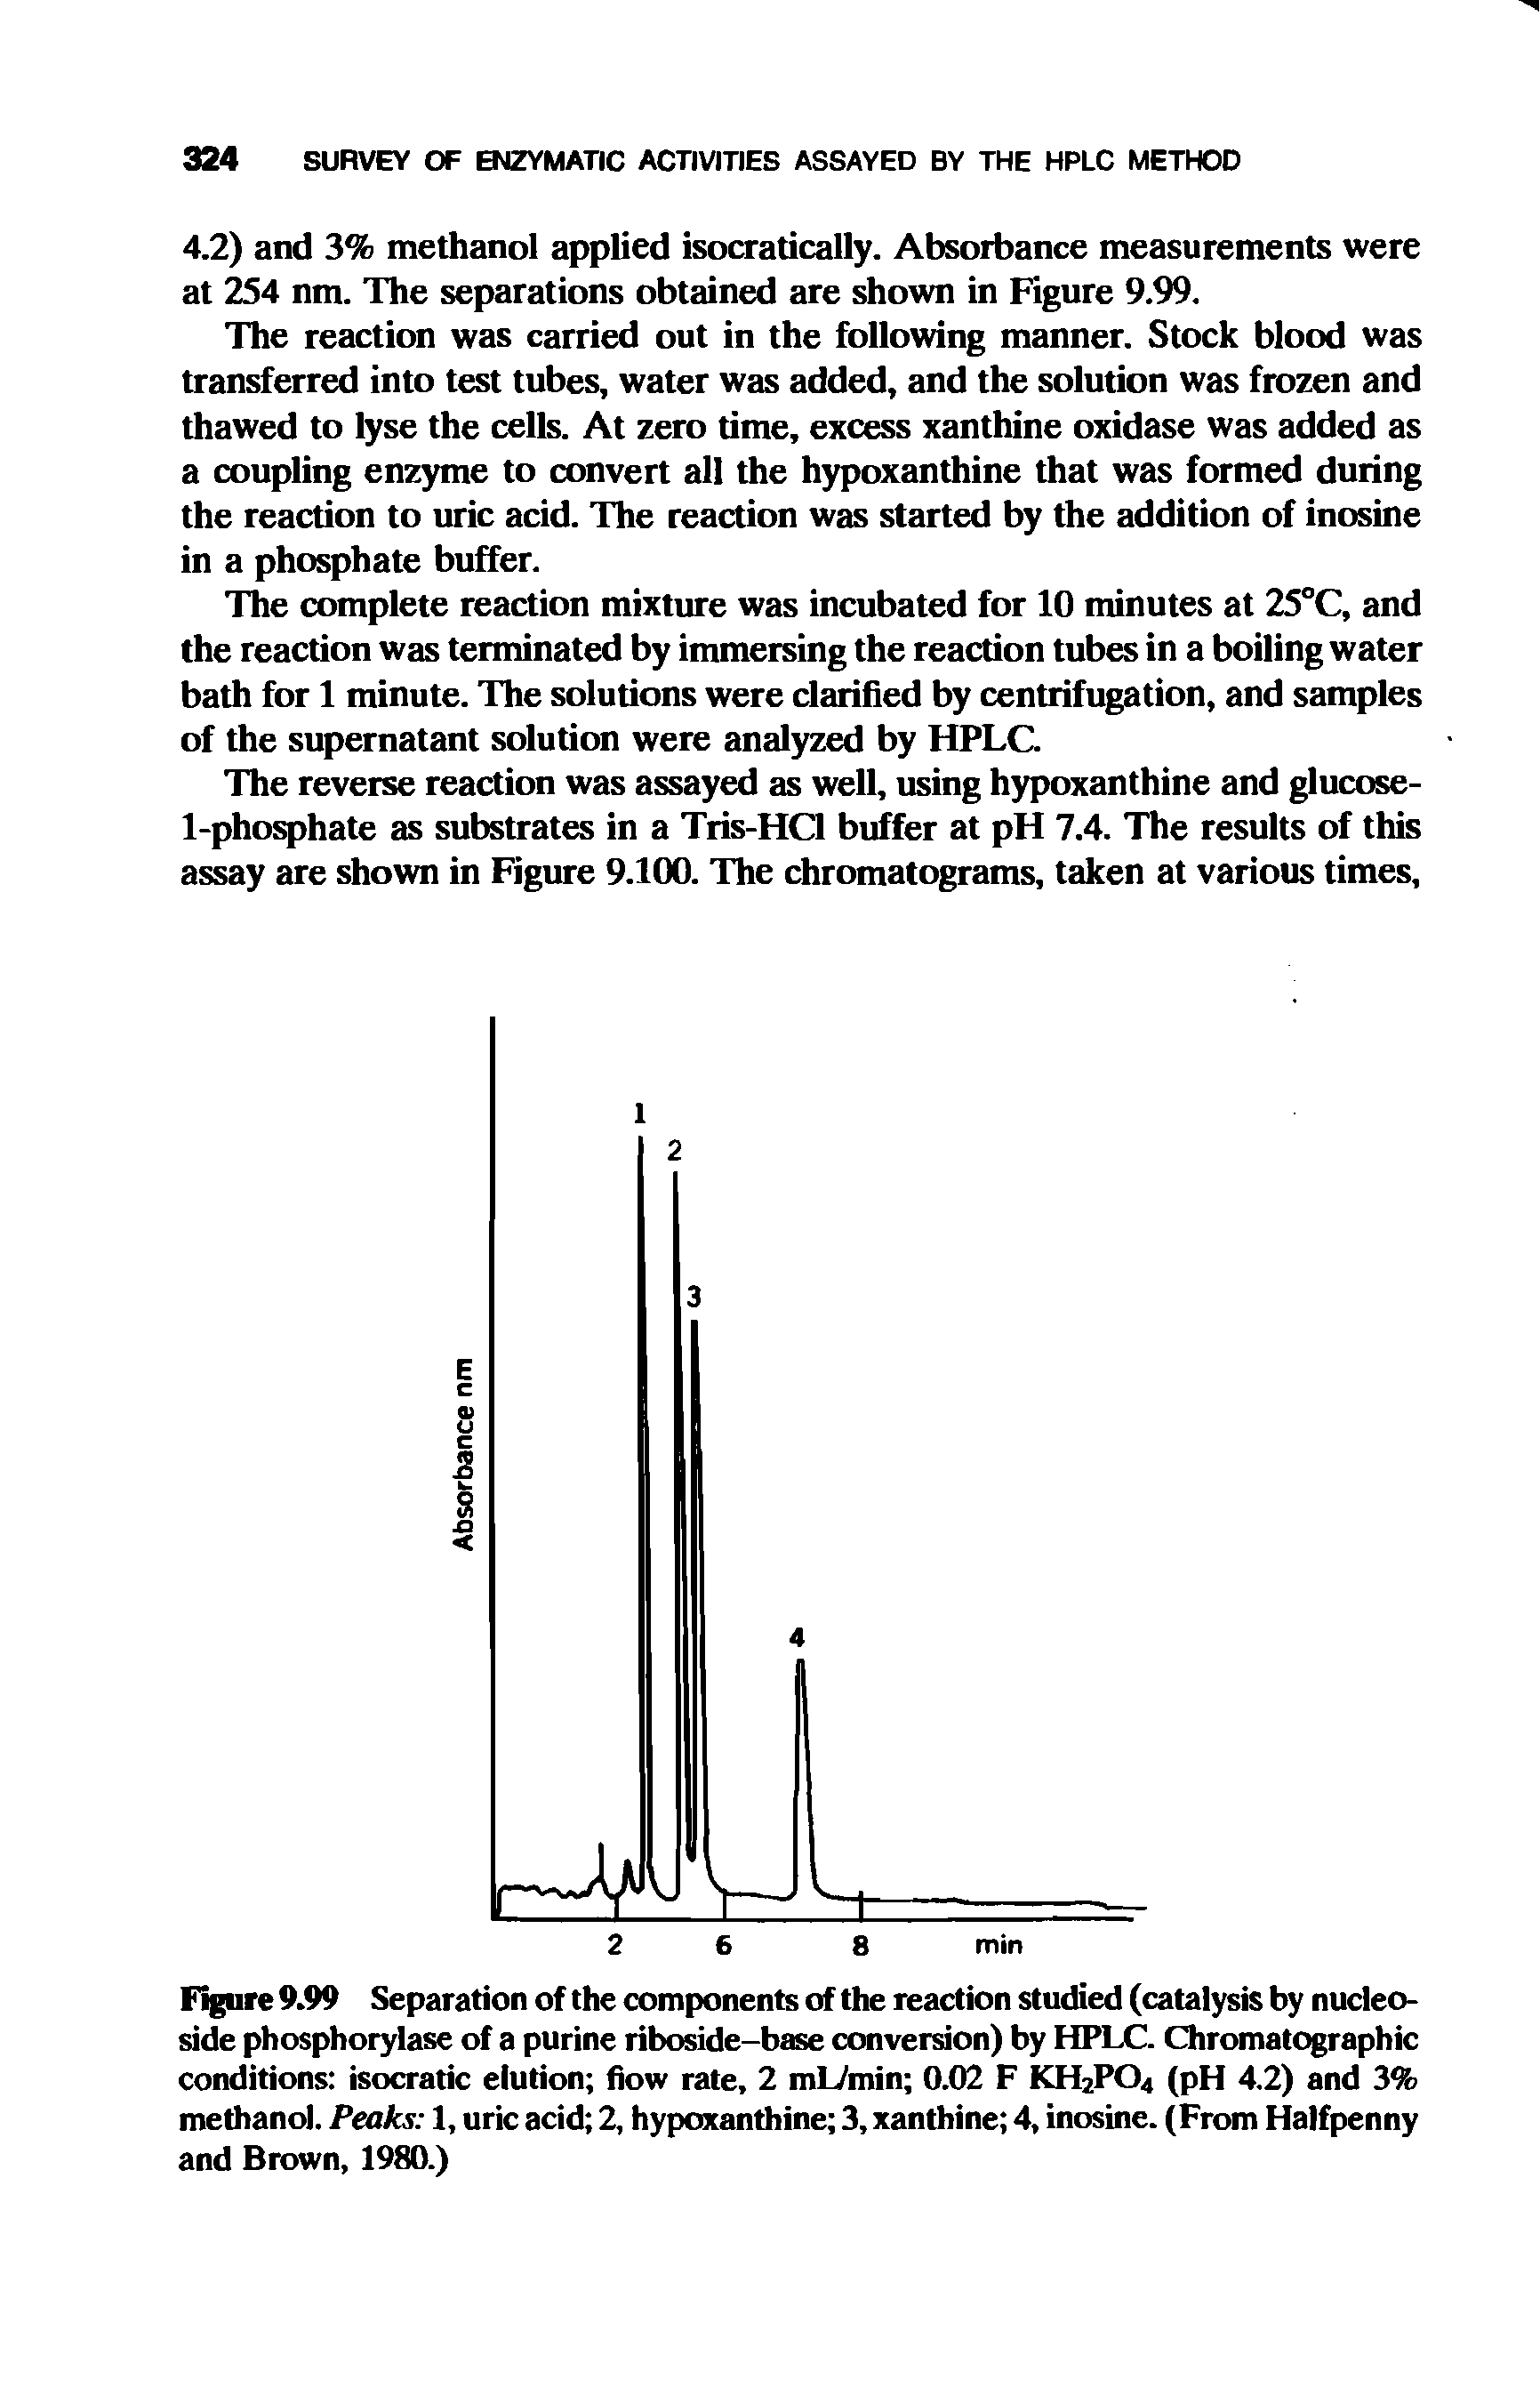 Figure 9.99 Separation of the components of the reaction studied (catalysis by nucleoside phosphorylase of a purine riboside-base conversion) by HPLC. Chromatographic conditions isocratic elution flow rate, 2 mL/min 0.02 F KH2P04 (pH 4.2) and 3% methanol. Peaks 1, uric acid 2, hypoxanthine 3, xanthine 4, inosine. (From Halfpenny and Brown, 1980.)...